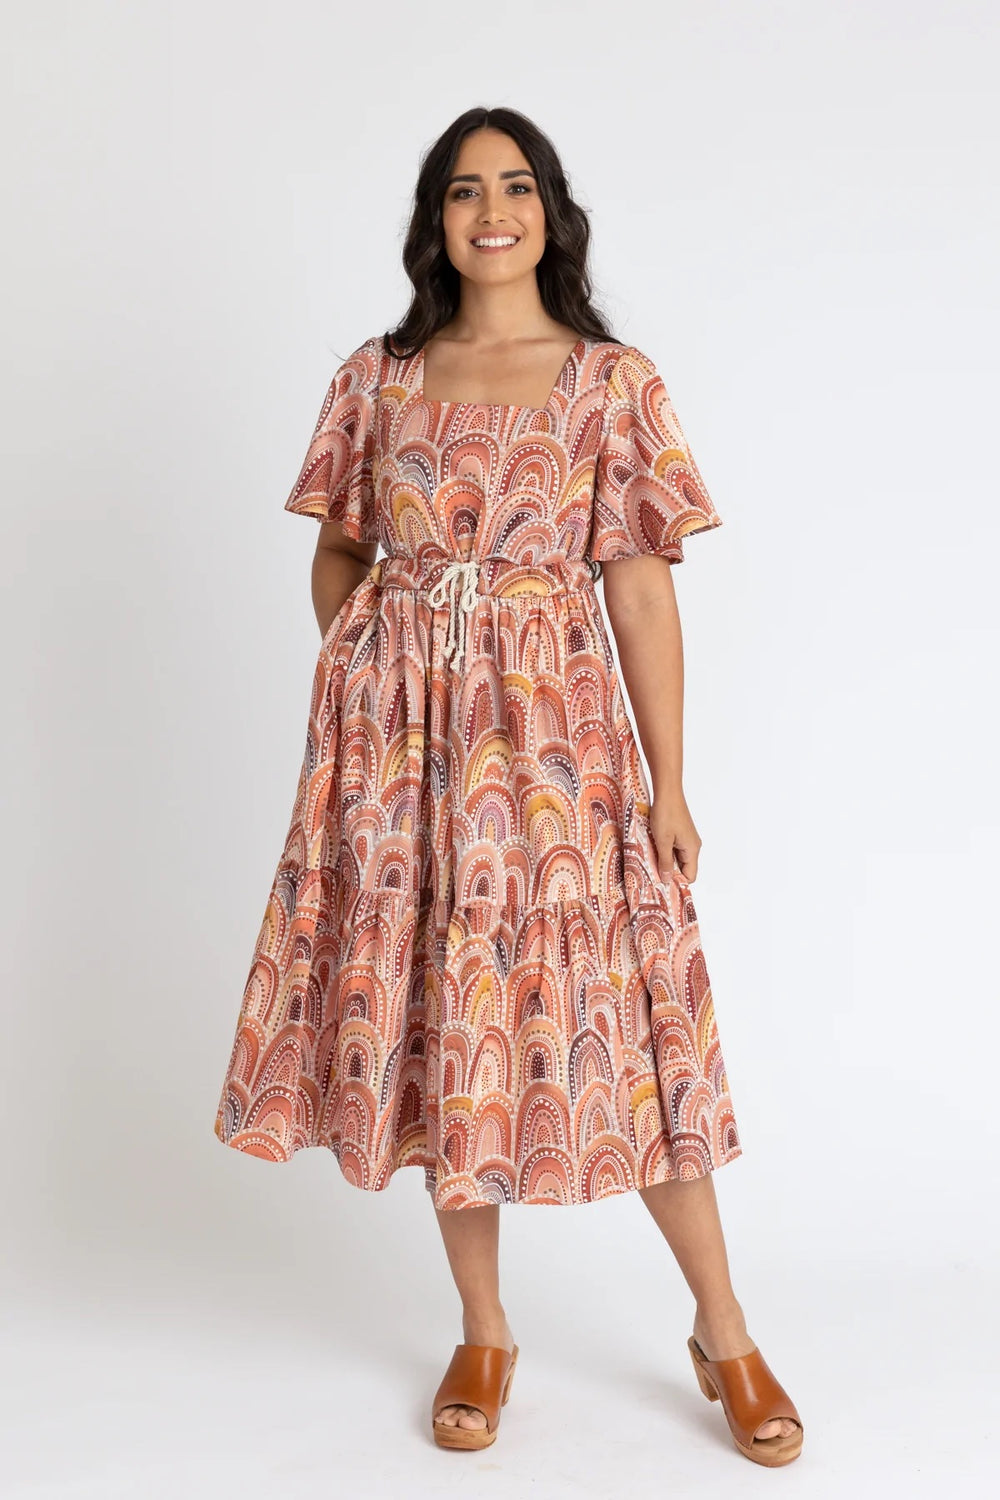 Woman wearing the Protea Dress sewing pattern from Megan Nielsen on The Fold Line. A dress pattern made in cotton, shirting, voile, batiste, lawn, silk, crepe, rayon, chambray or linen fabrics, featuring a square neckline, flutter sleeves, tiered gathered